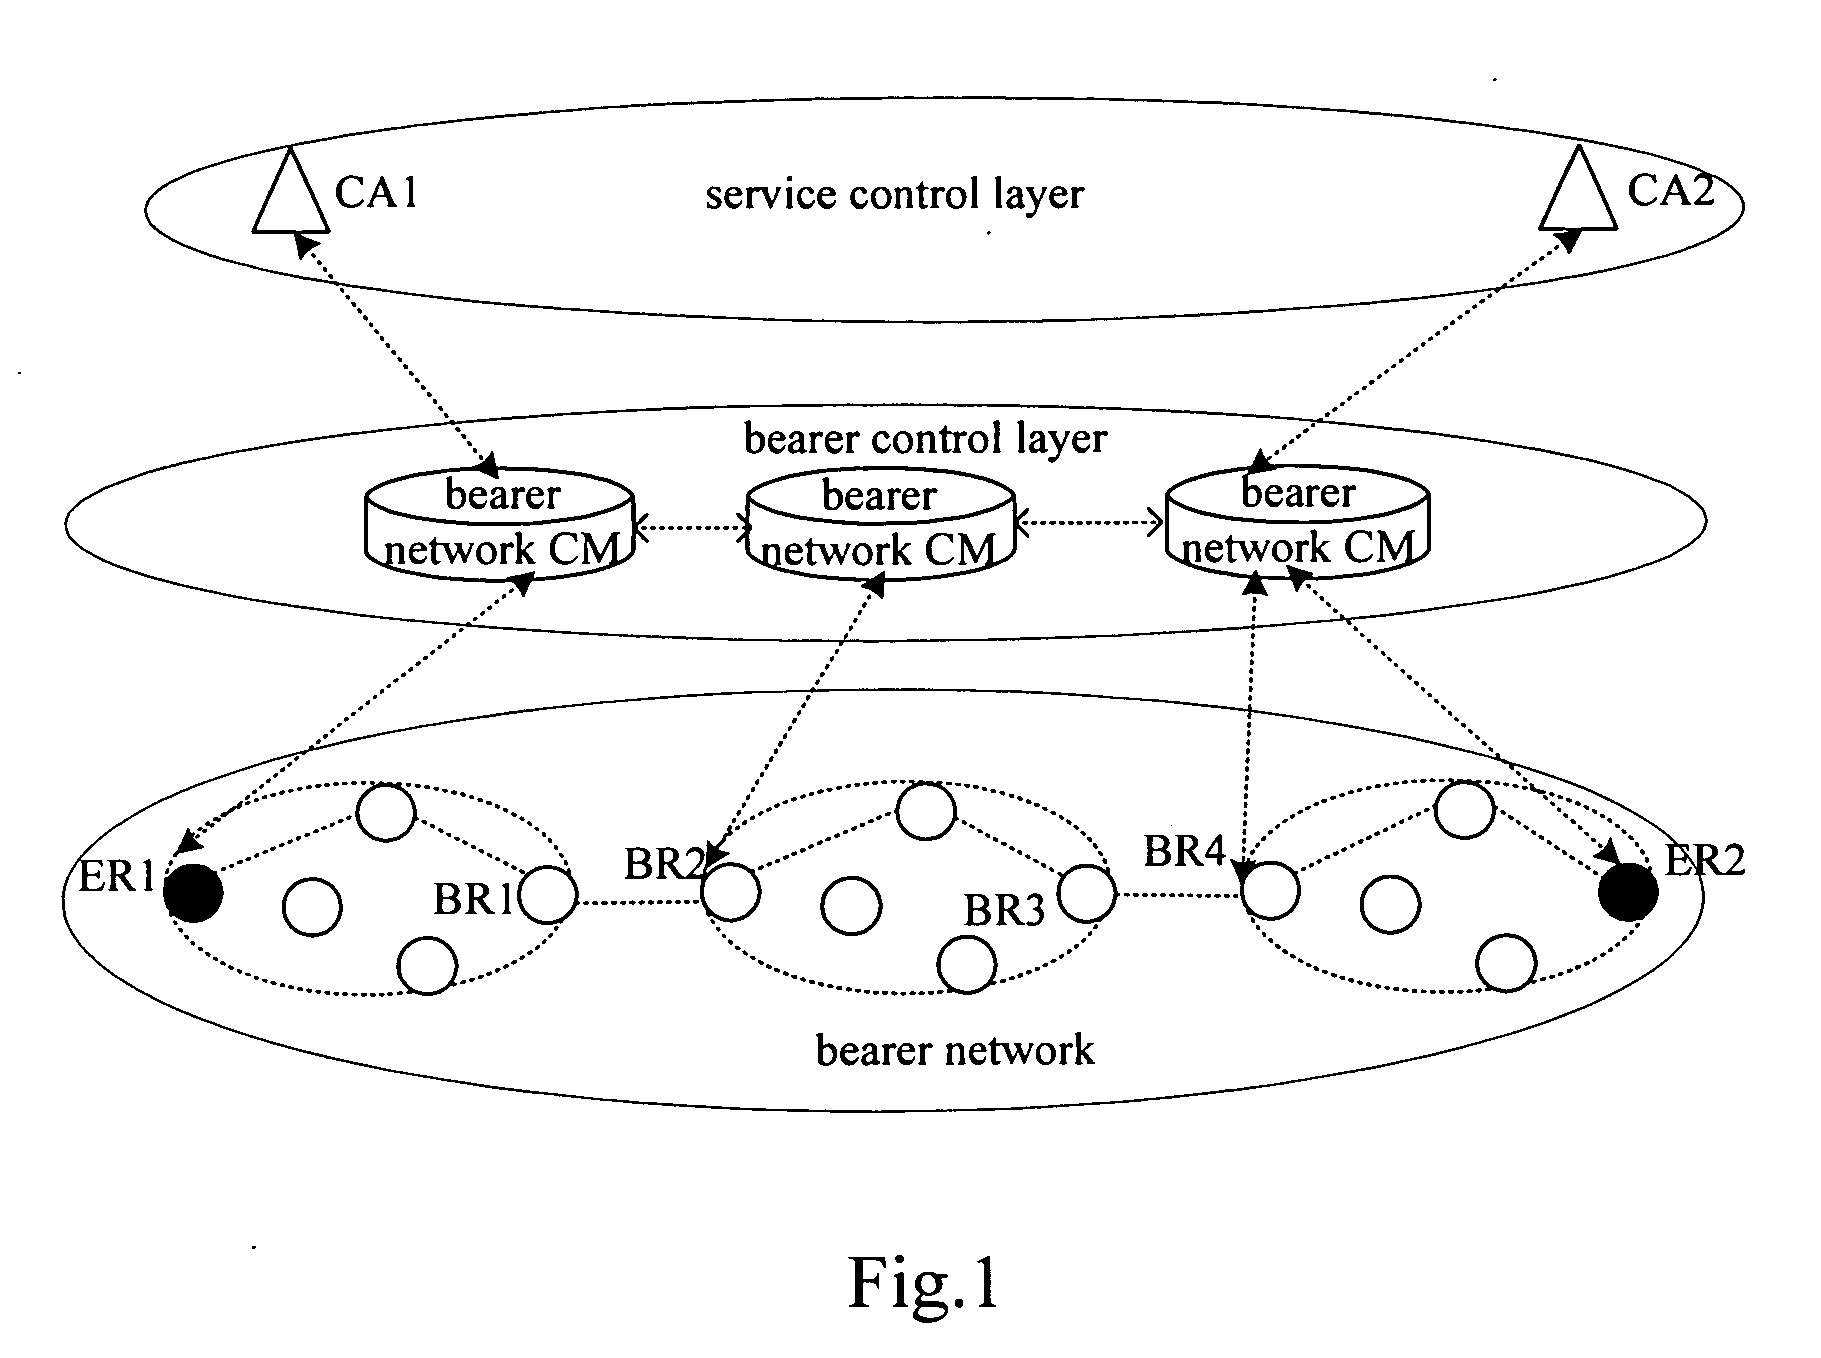 Signalling exchange method for guaranteeing internet protocol quality of service